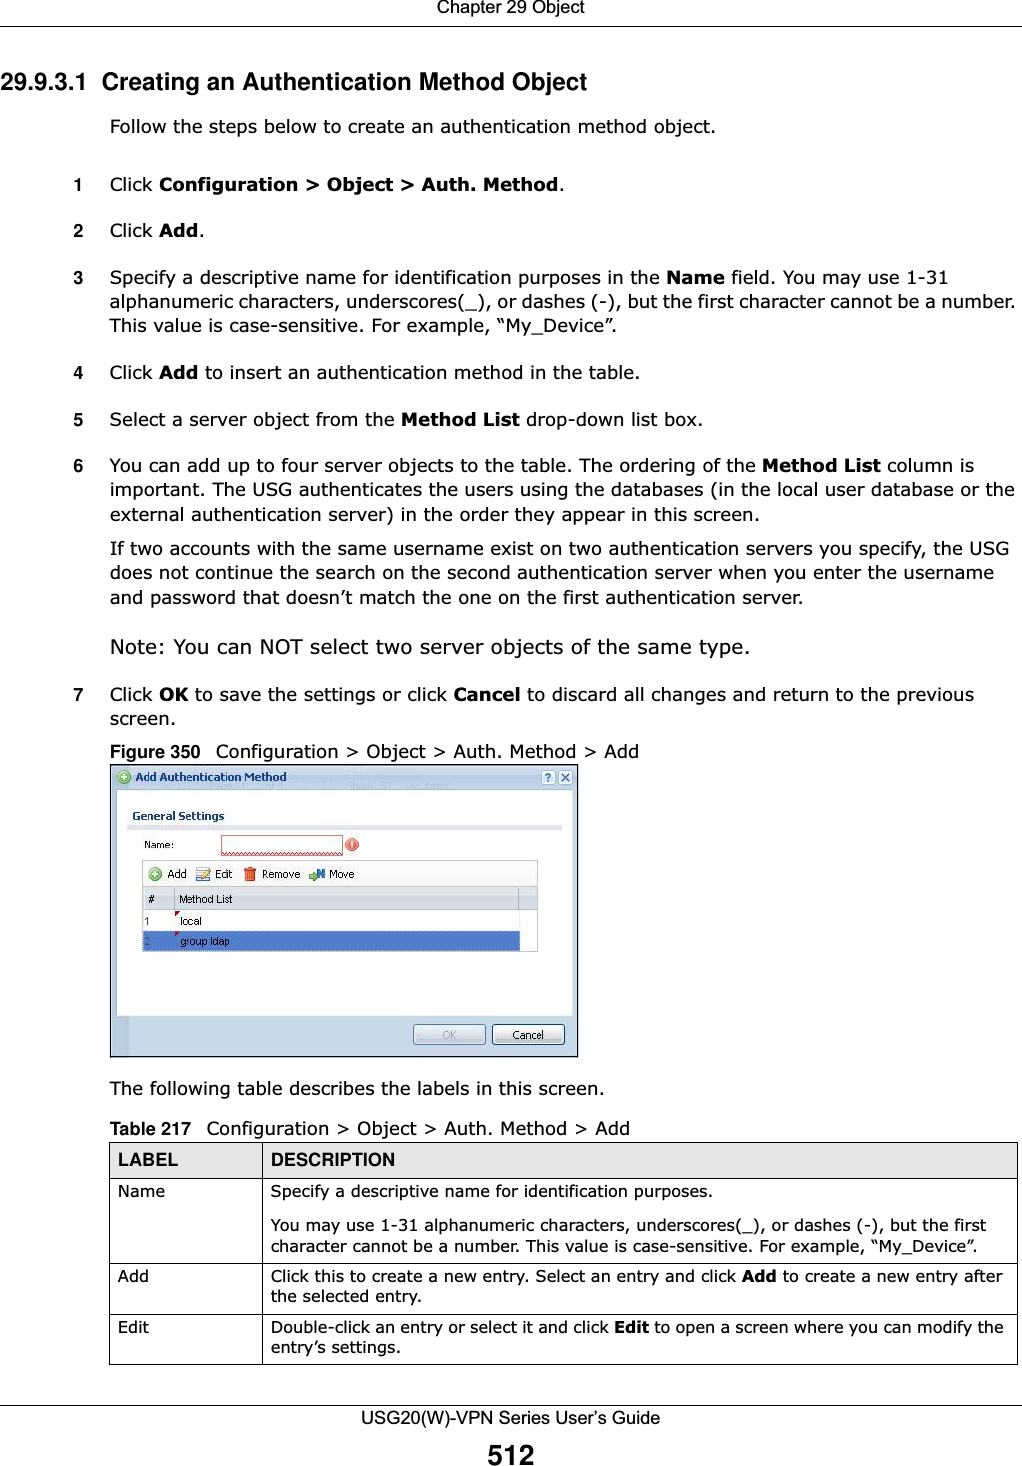 Chapter 29 ObjectUSG20(W)-VPN Series User’s Guide51229.9.3.1  Creating an Authentication Method Object Follow the steps below to create an authentication method object.1Click Configuration &gt; Object &gt; Auth. Method.2Click Add.3Specify a descriptive name for identification purposes in the Name field. You may use 1-31 alphanumeric characters, underscores(_), or dashes (-), but the first character cannot be a number. This value is case-sensitive. For example, “My_Device”.   4Click Add to insert an authentication method in the table.5Select a server object from the Method List drop-down list box.6You can add up to four server objects to the table. The ordering of the Method List column is important. The USG authenticates the users using the databases (in the local user database or the external authentication server) in the order they appear in this screen. If two accounts with the same username exist on two authentication servers you specify, the USG does not continue the search on the second authentication server when you enter the username and password that doesn’t match the one on the first authentication server. Note: You can NOT select two server objects of the same type. 7Click OK to save the settings or click Cancel to discard all changes and return to the previous screen. Figure 350   Configuration &gt; Object &gt; Auth. Method &gt; Add The following table describes the labels in this screen.  Table 217   Configuration &gt; Object &gt; Auth. Method &gt; AddLABEL DESCRIPTIONName Specify a descriptive name for identification purposes. You may use 1-31 alphanumeric characters, underscores(_), or dashes (-), but the first character cannot be a number. This value is case-sensitive. For example, “My_Device”.Add Click this to create a new entry. Select an entry and click Add to create a new entry after the selected entry.Edit Double-click an entry or select it and click Edit to open a screen where you can modify the entry’s settings. 